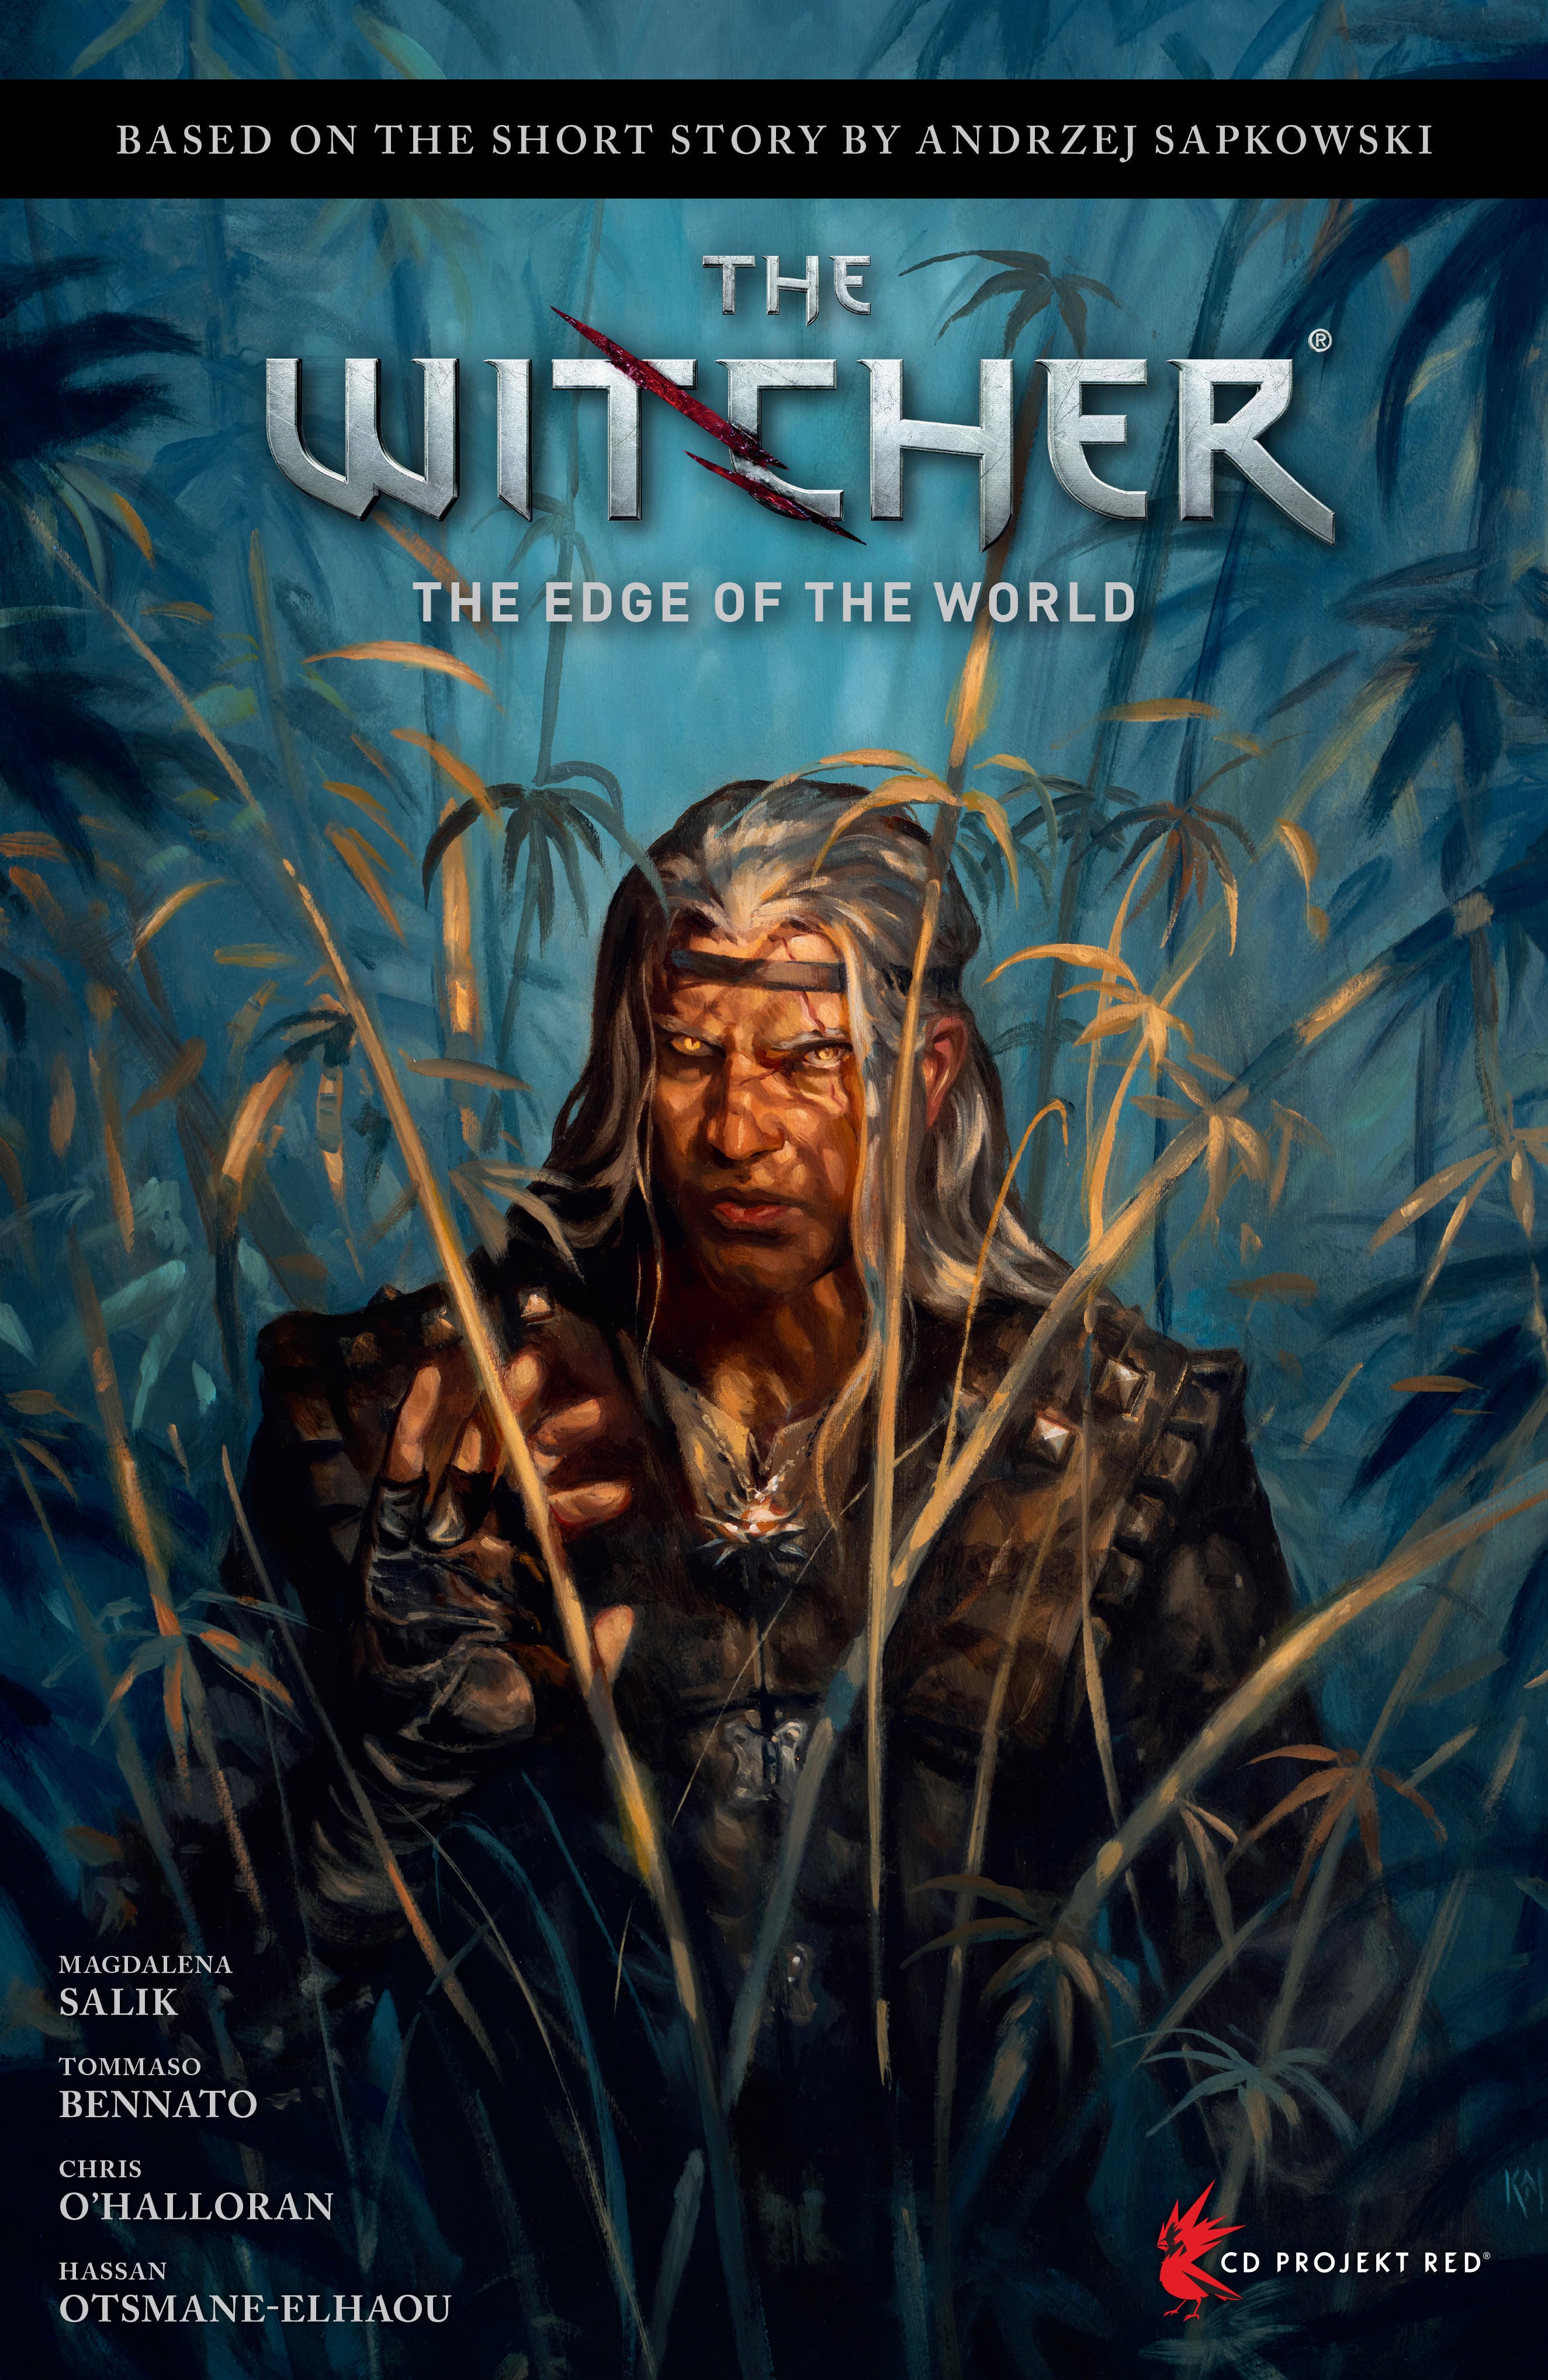 the-witcher-edge-of-the-world-cover.jpg